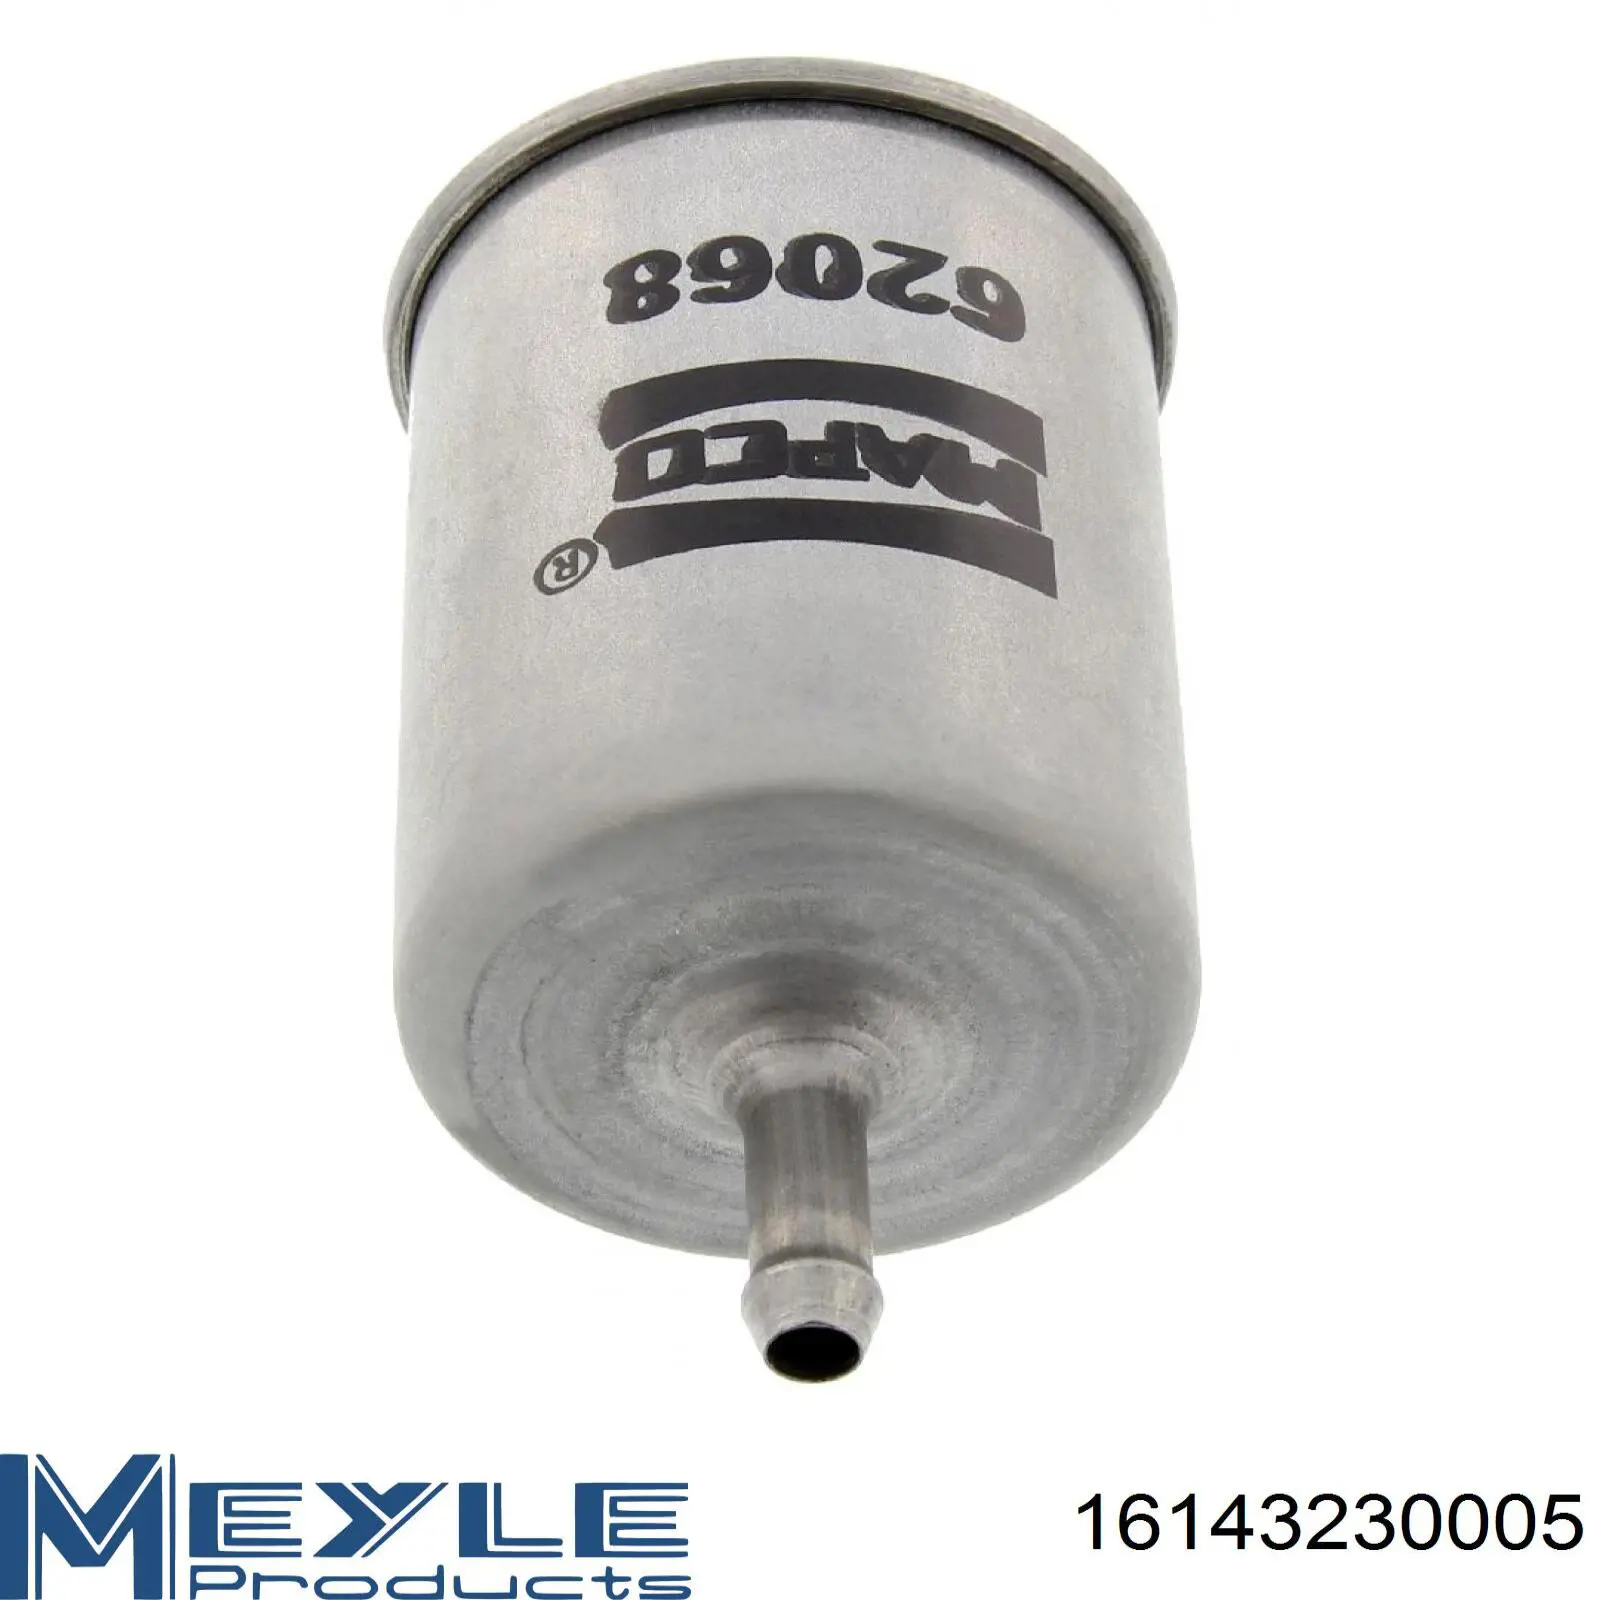 16143230005 Meyle filtro combustible